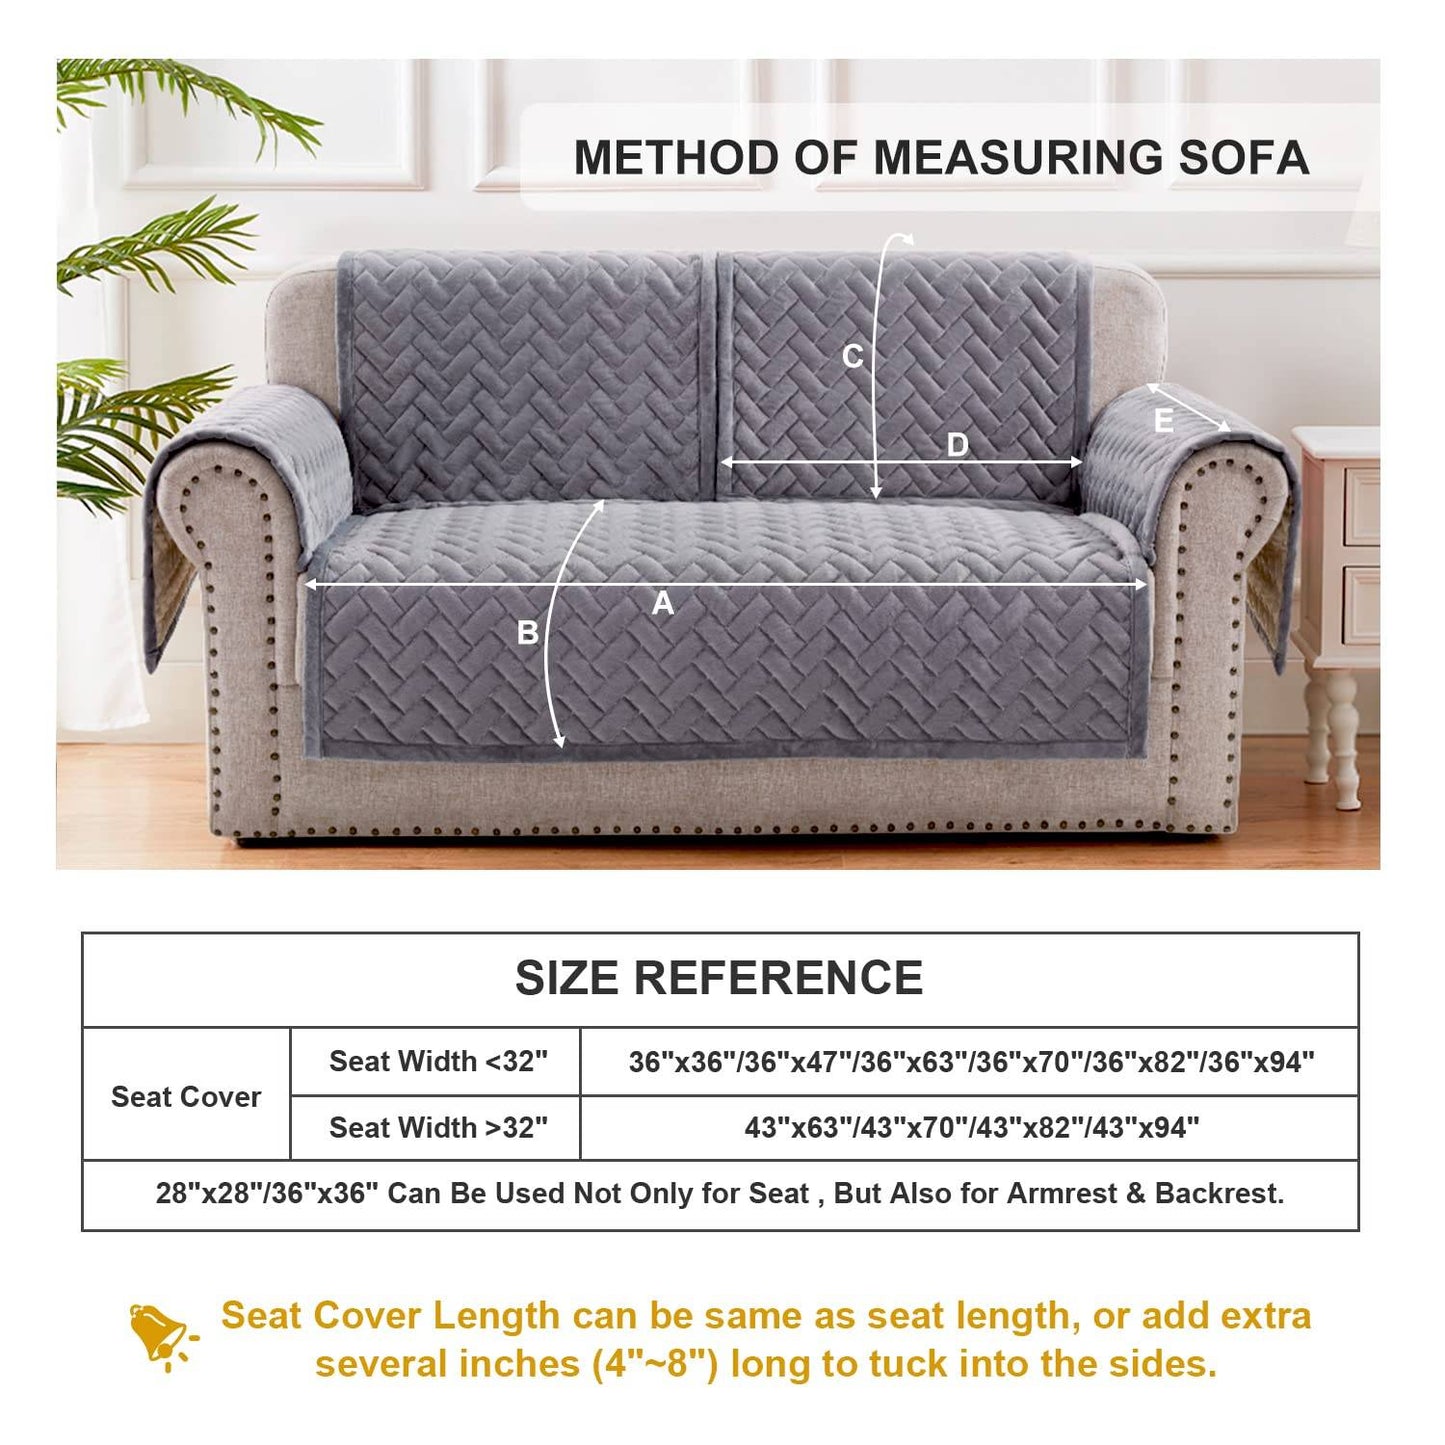 OstepDecor Couch Cover, Sofa Cover, Quilted Sectional Couch Covers, Velvet Sofa Slipcover for Dogs Cats Pet Love Seat Recliner Leather L Shaped, Armrest Backrest Cover, Gray 36 x 63 Inches